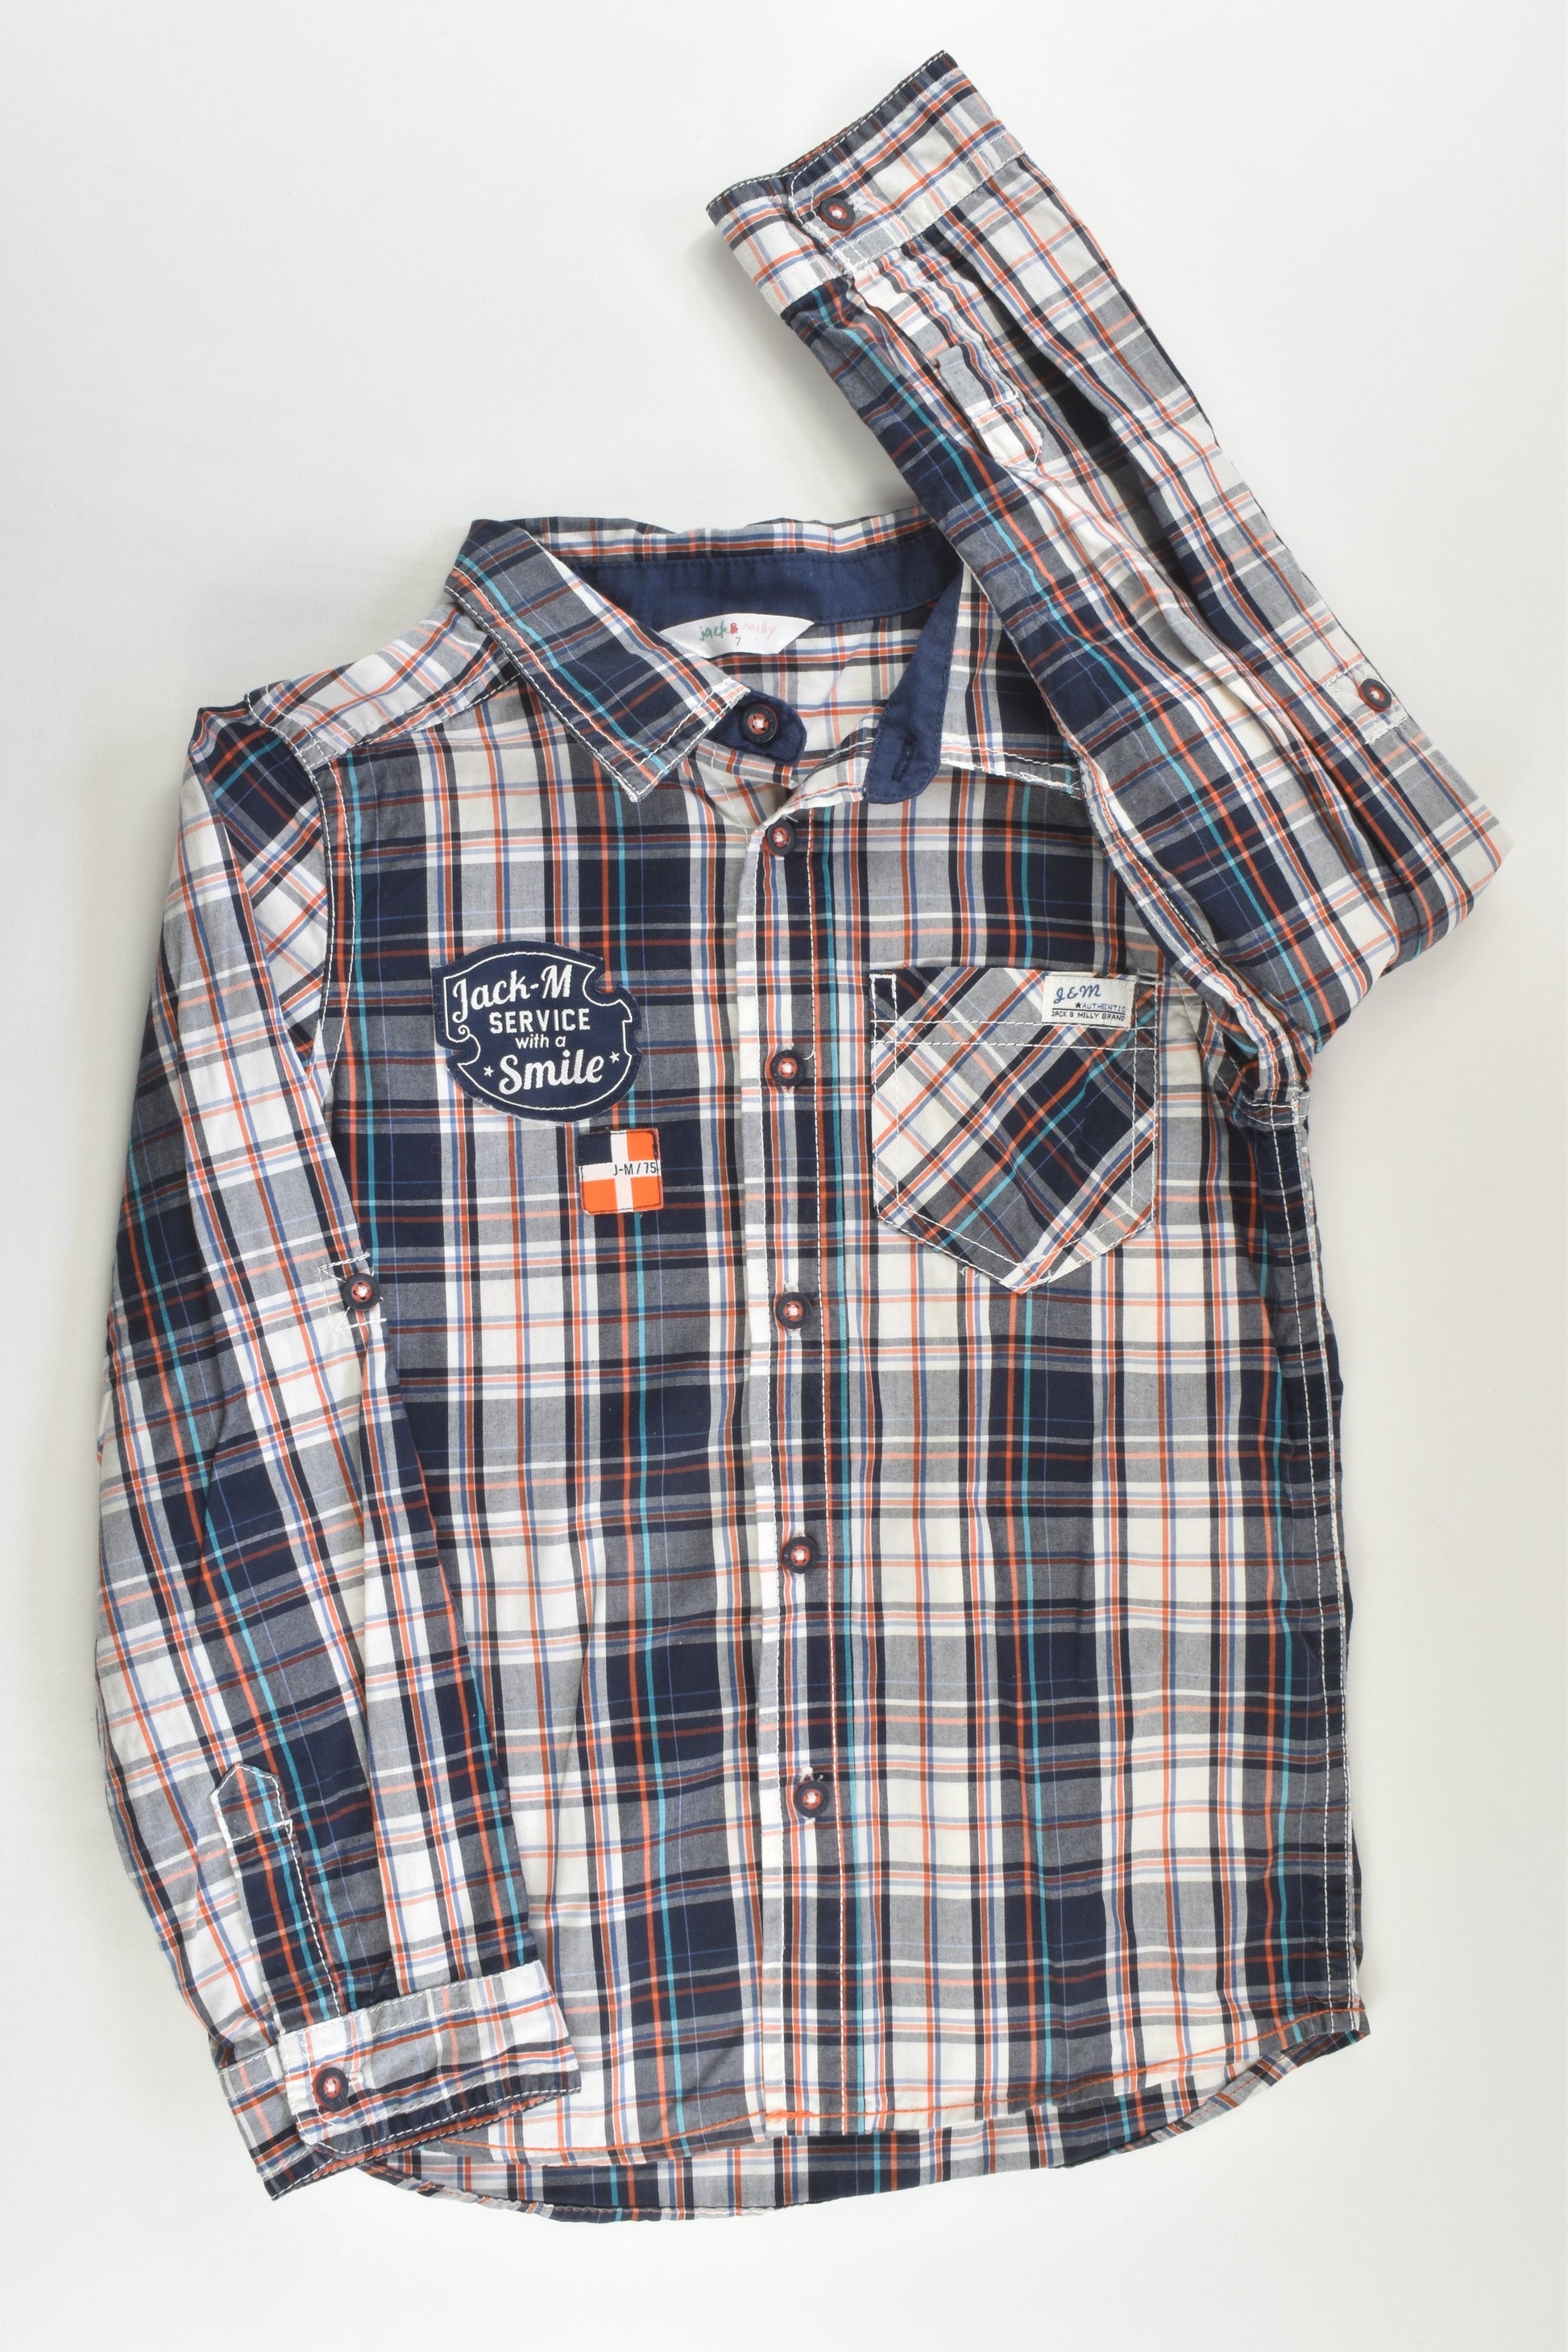 Jack & Milly Size 7 Checked Shirt